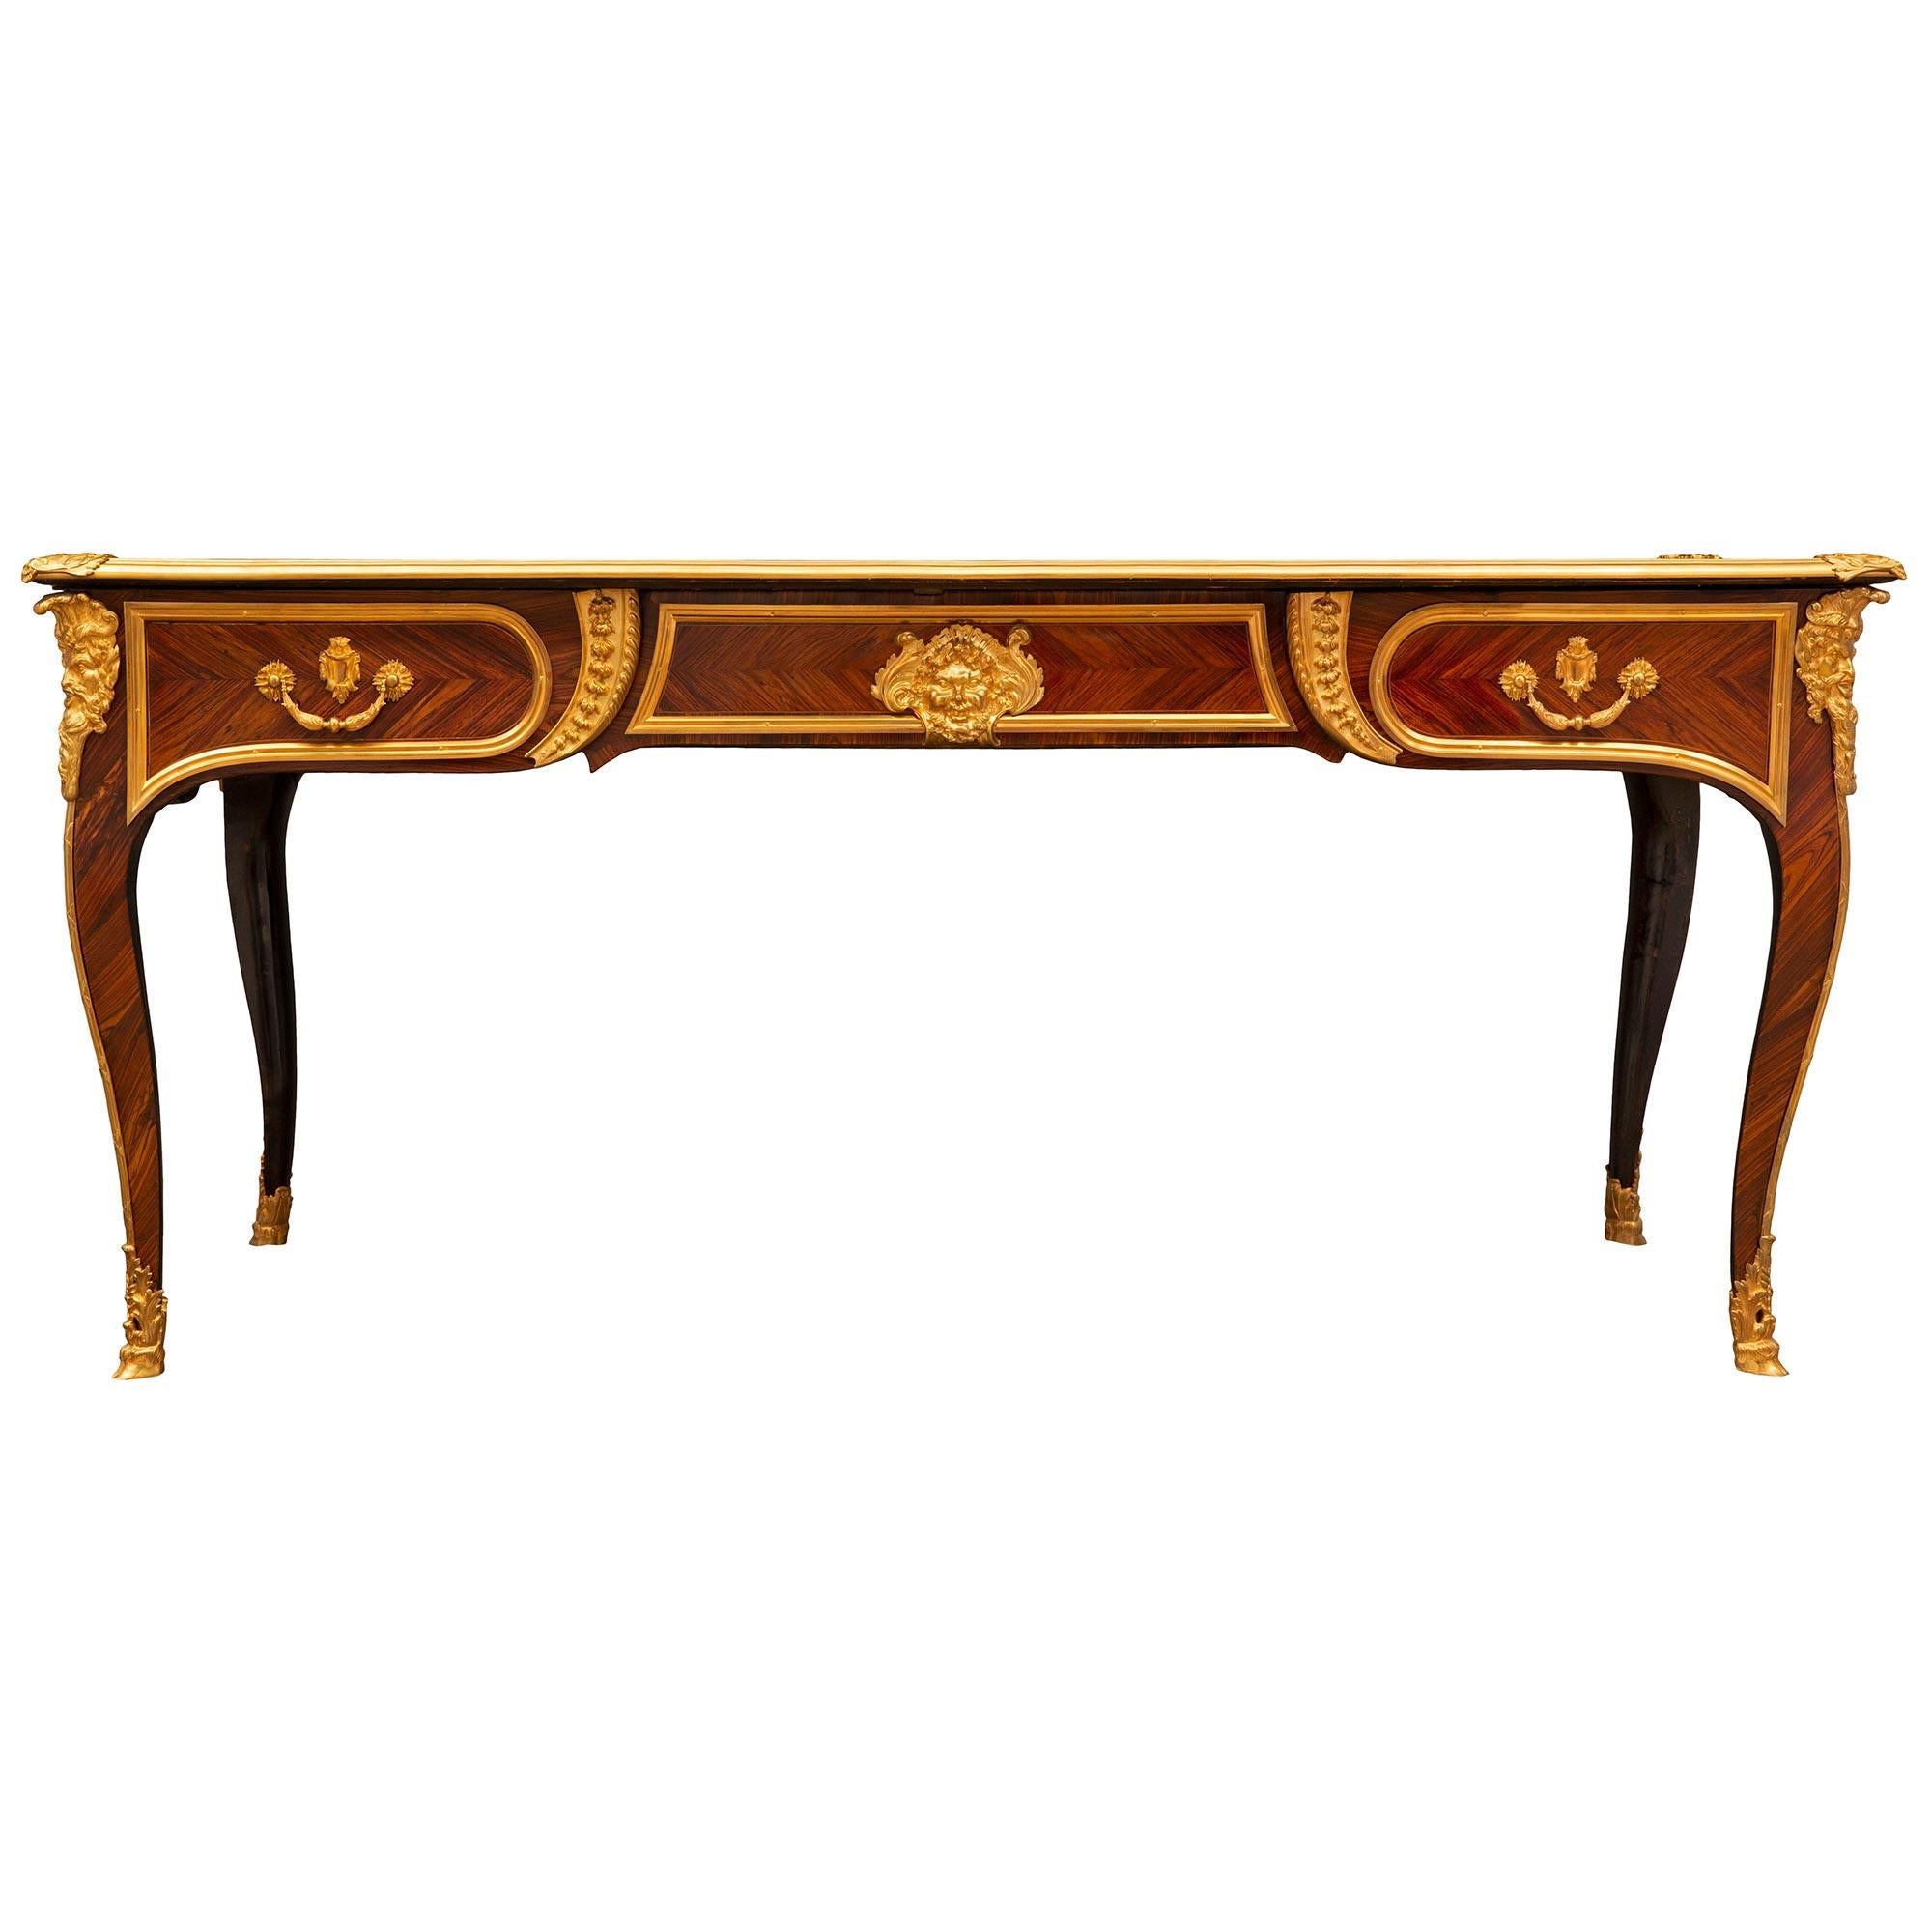 French 18th Century Louis XV Period Bureau Plat In Good Condition For Sale In West Palm Beach, FL